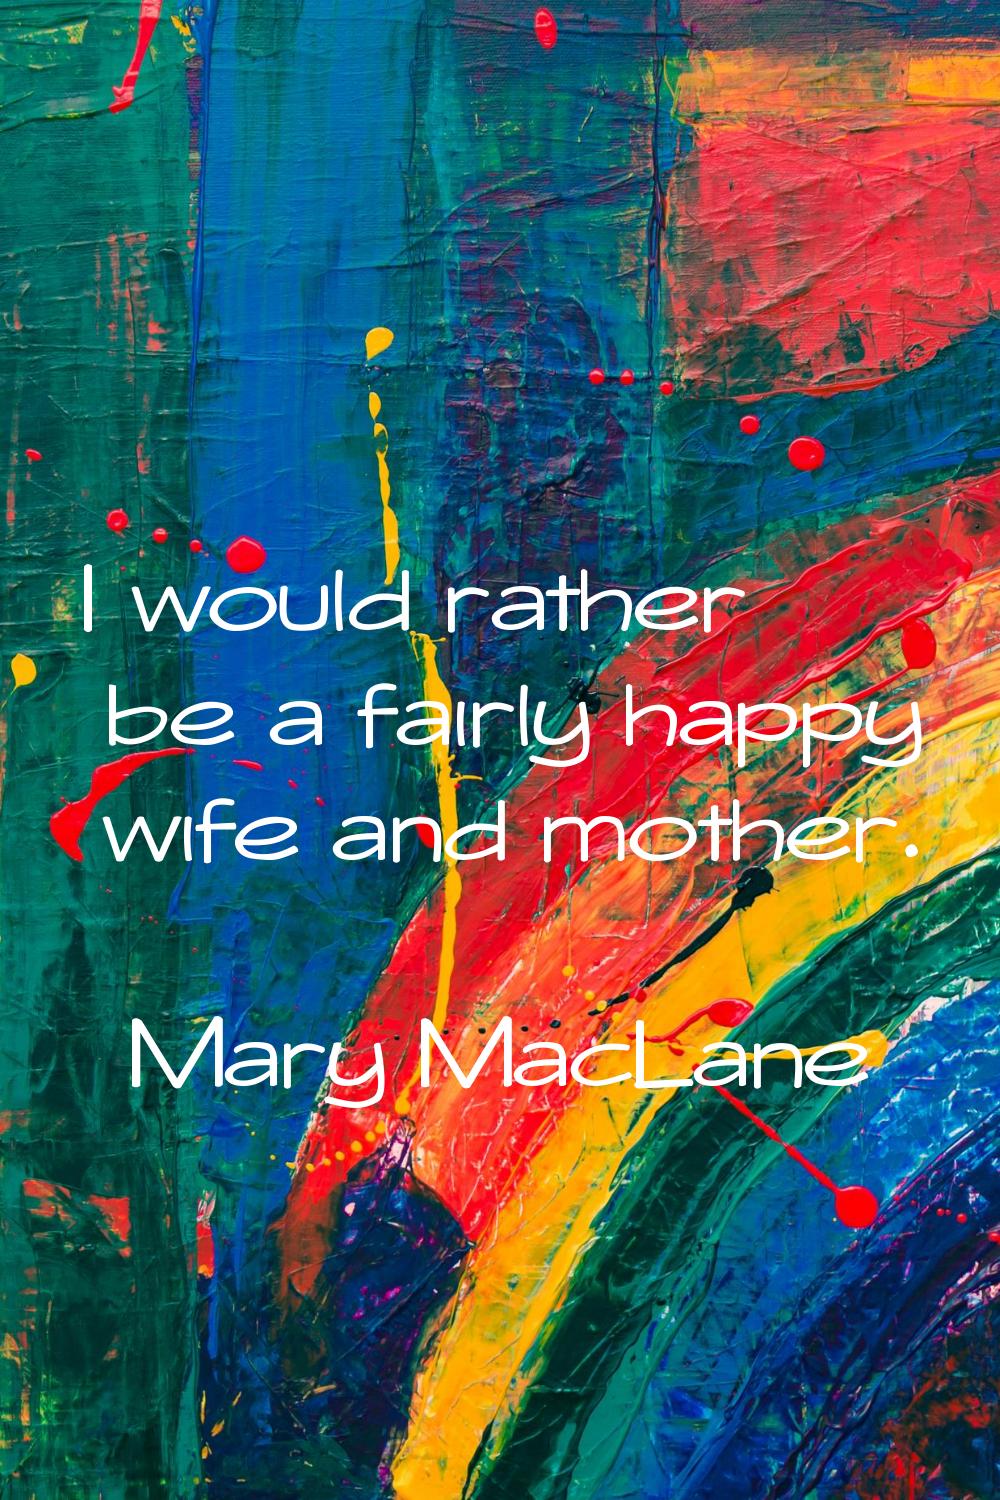 I would rather be a fairly happy wife and mother.